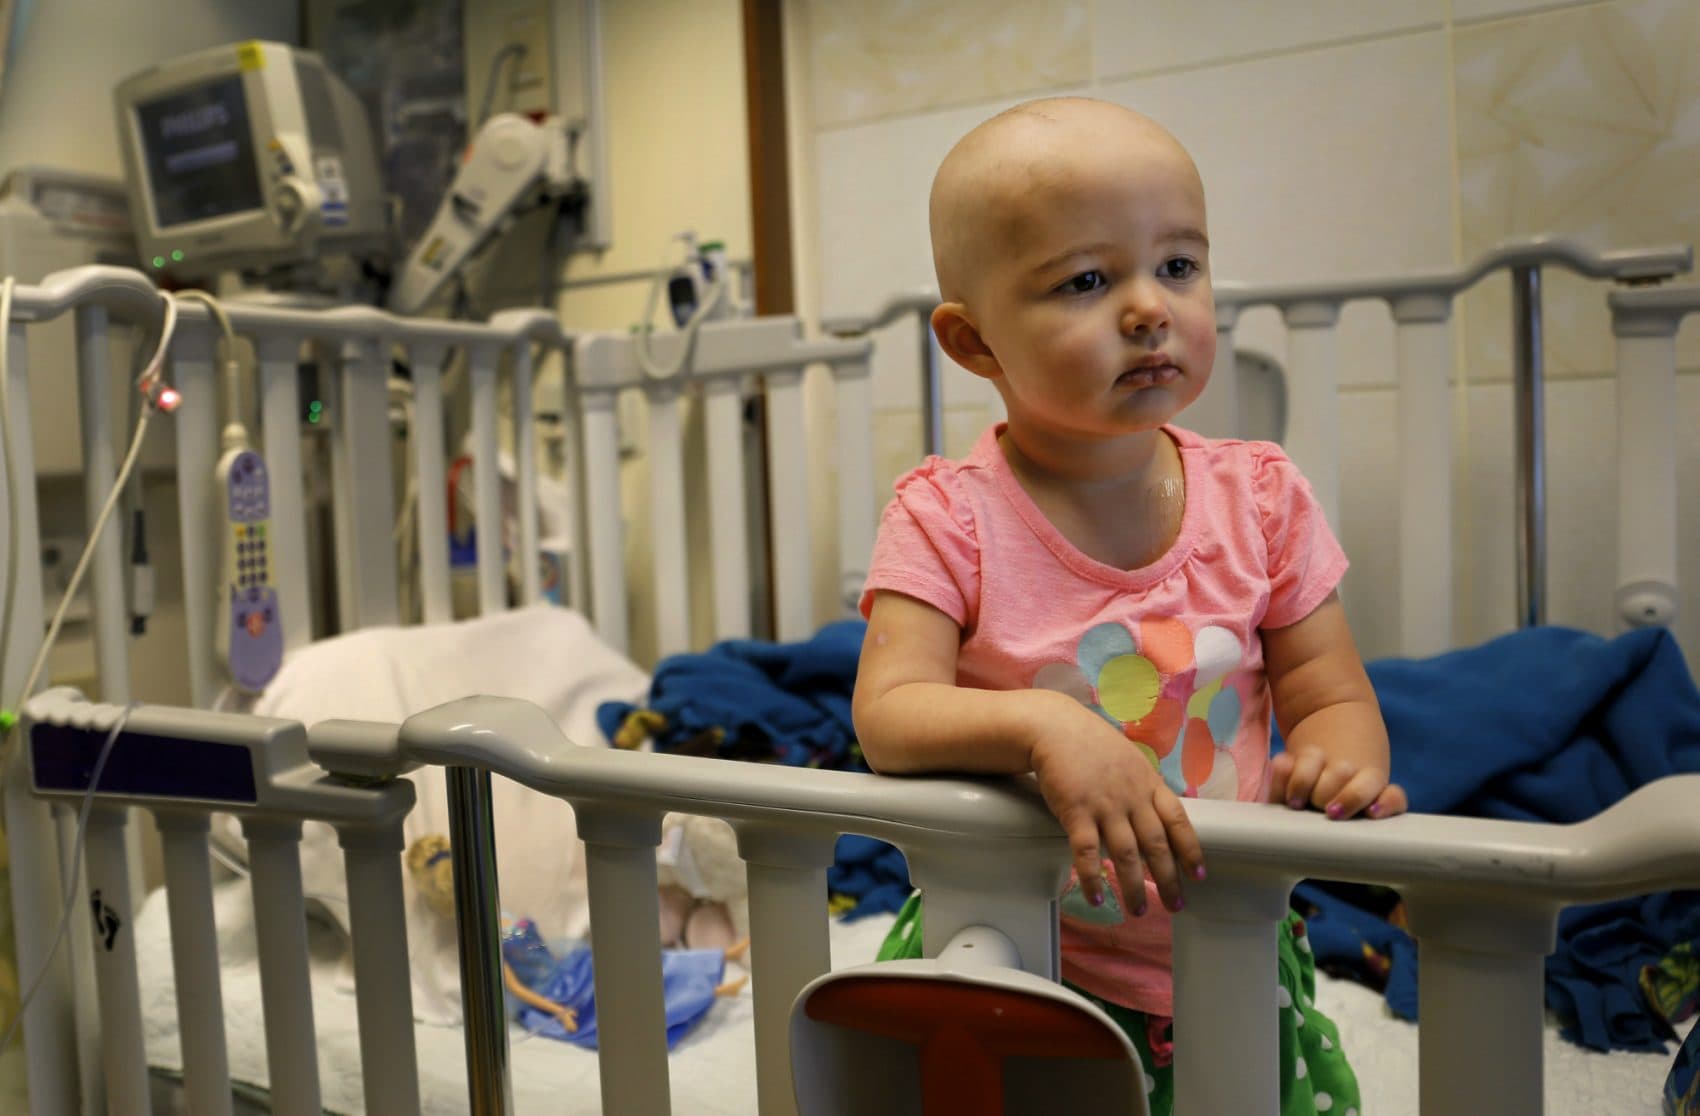 Why Doesn't Pediatric Cancer Get The Attention It Deserves